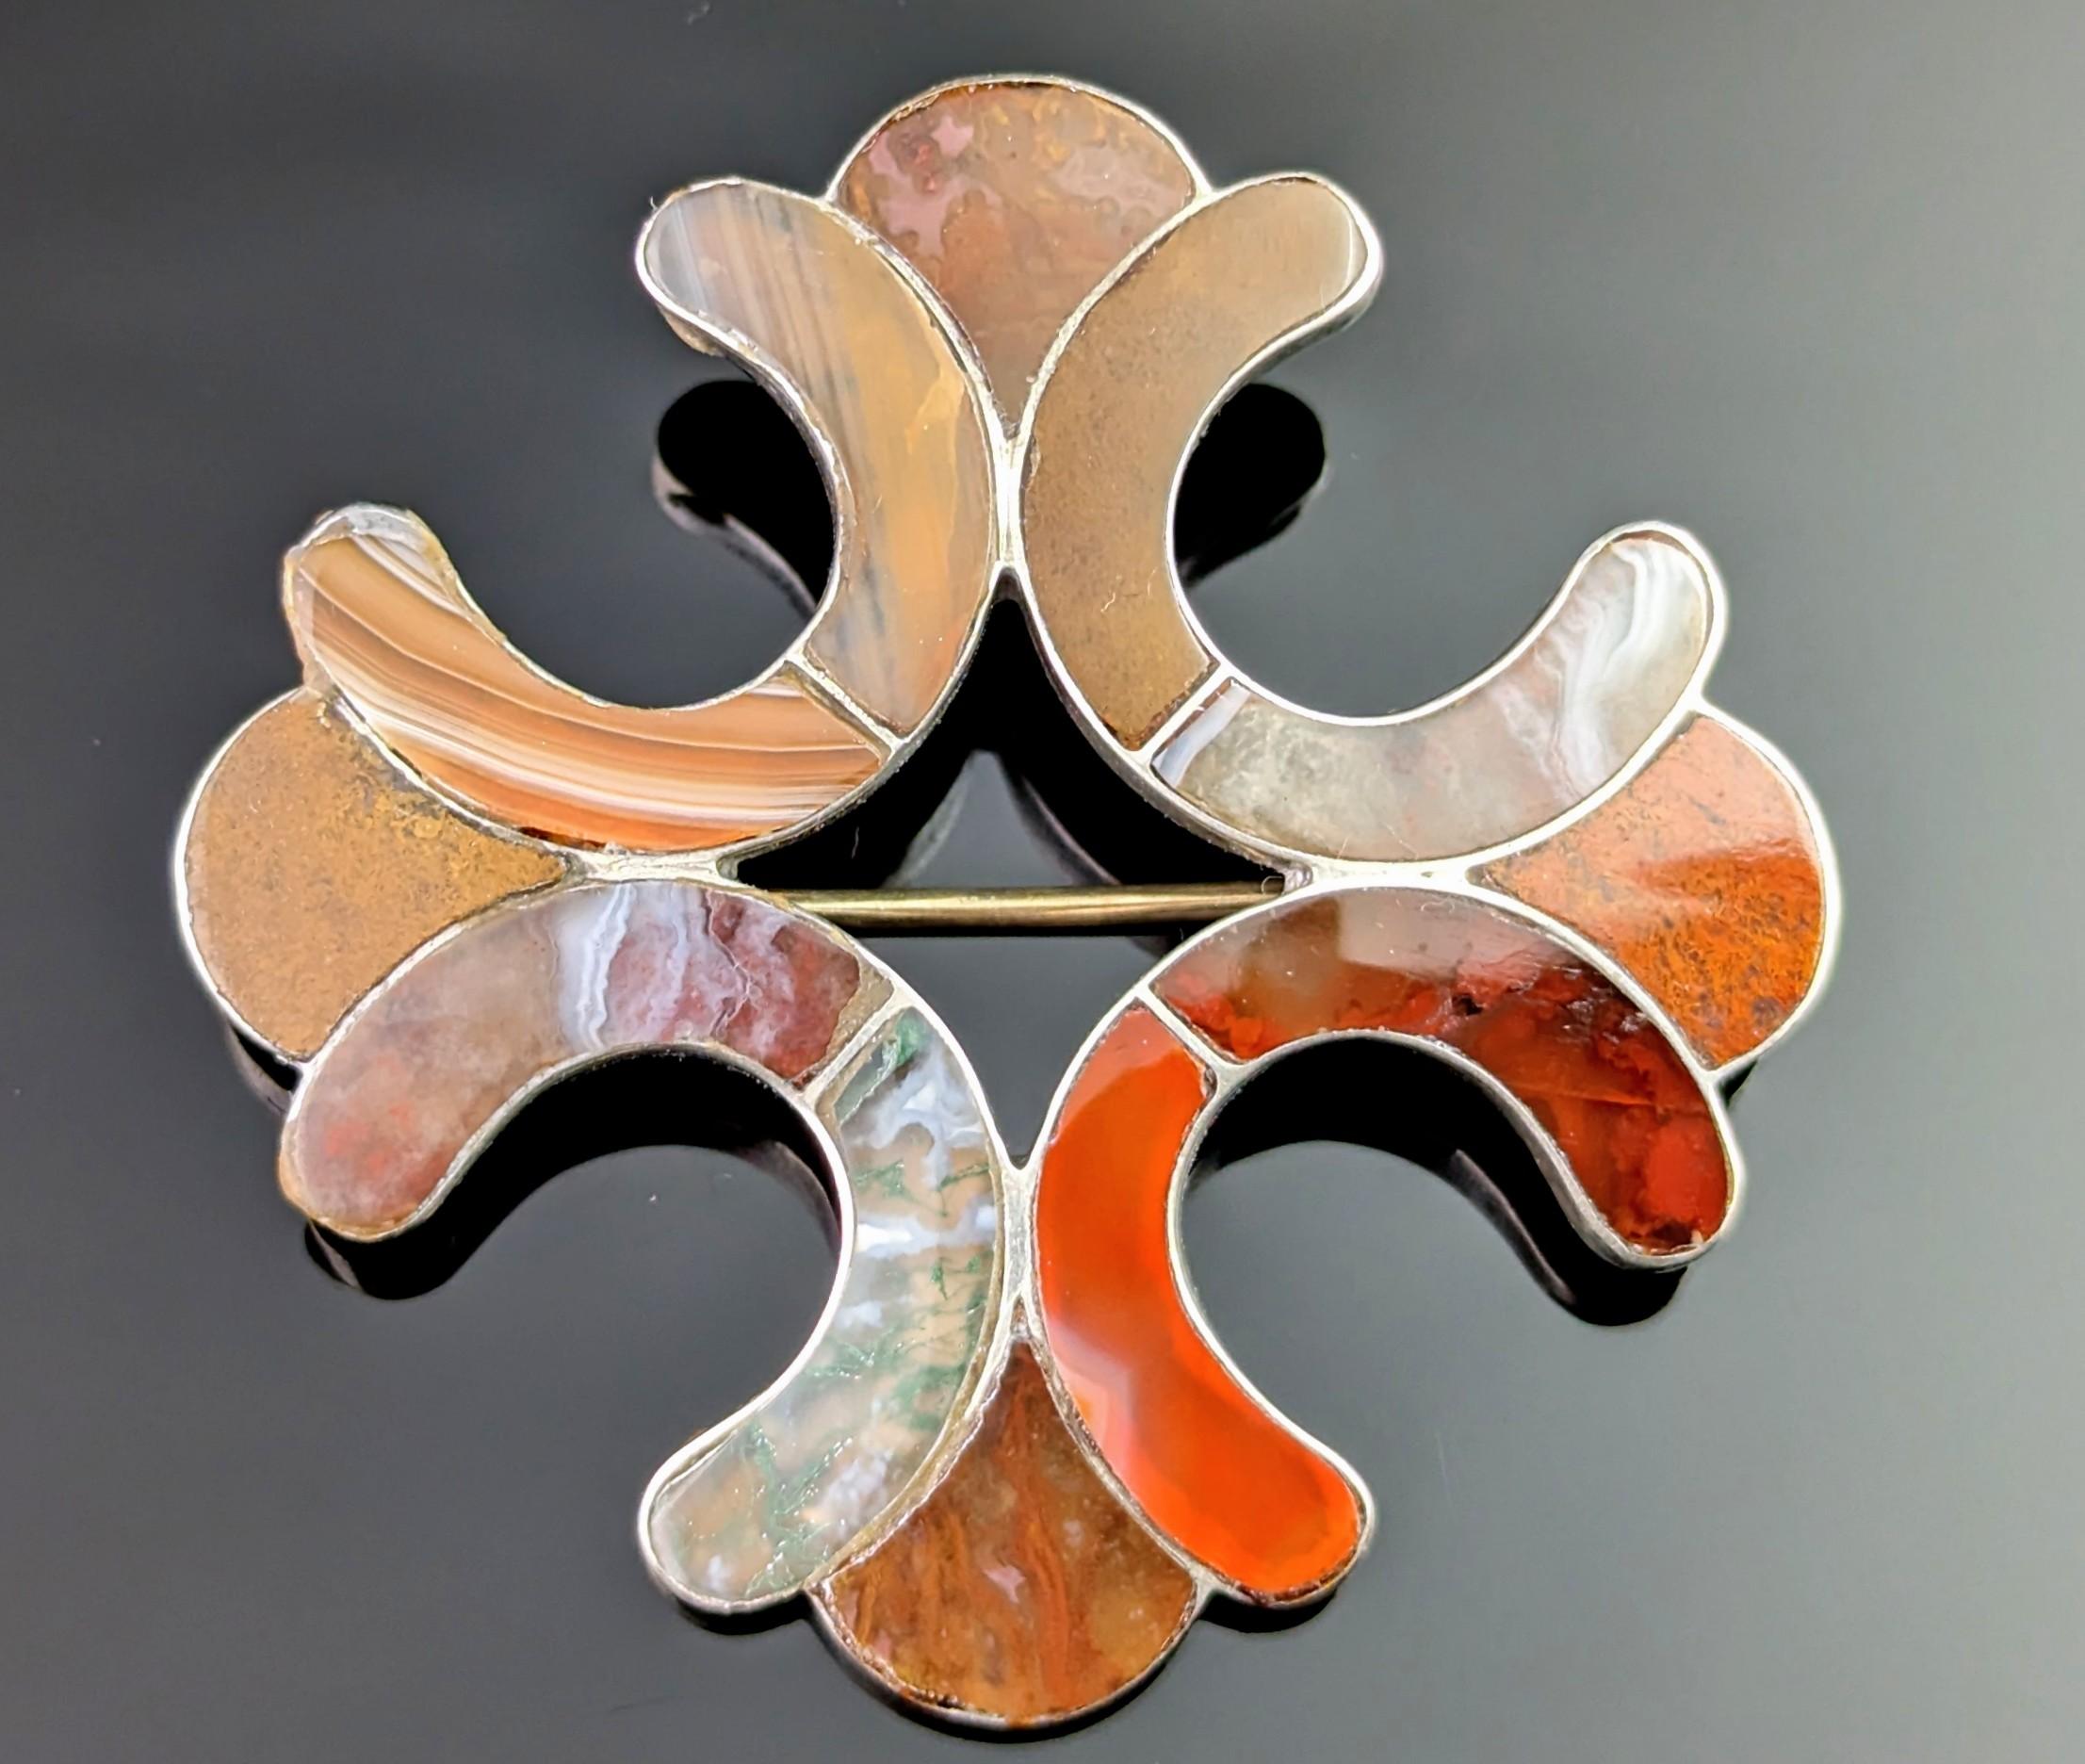 We love this unusual antique, Victorian era Scottish agate and silver Celtic cross brooch.

It has such a unique shape and design made up of smooth polished sections of various different agates, some in half circle, horseshoe like shapes which give